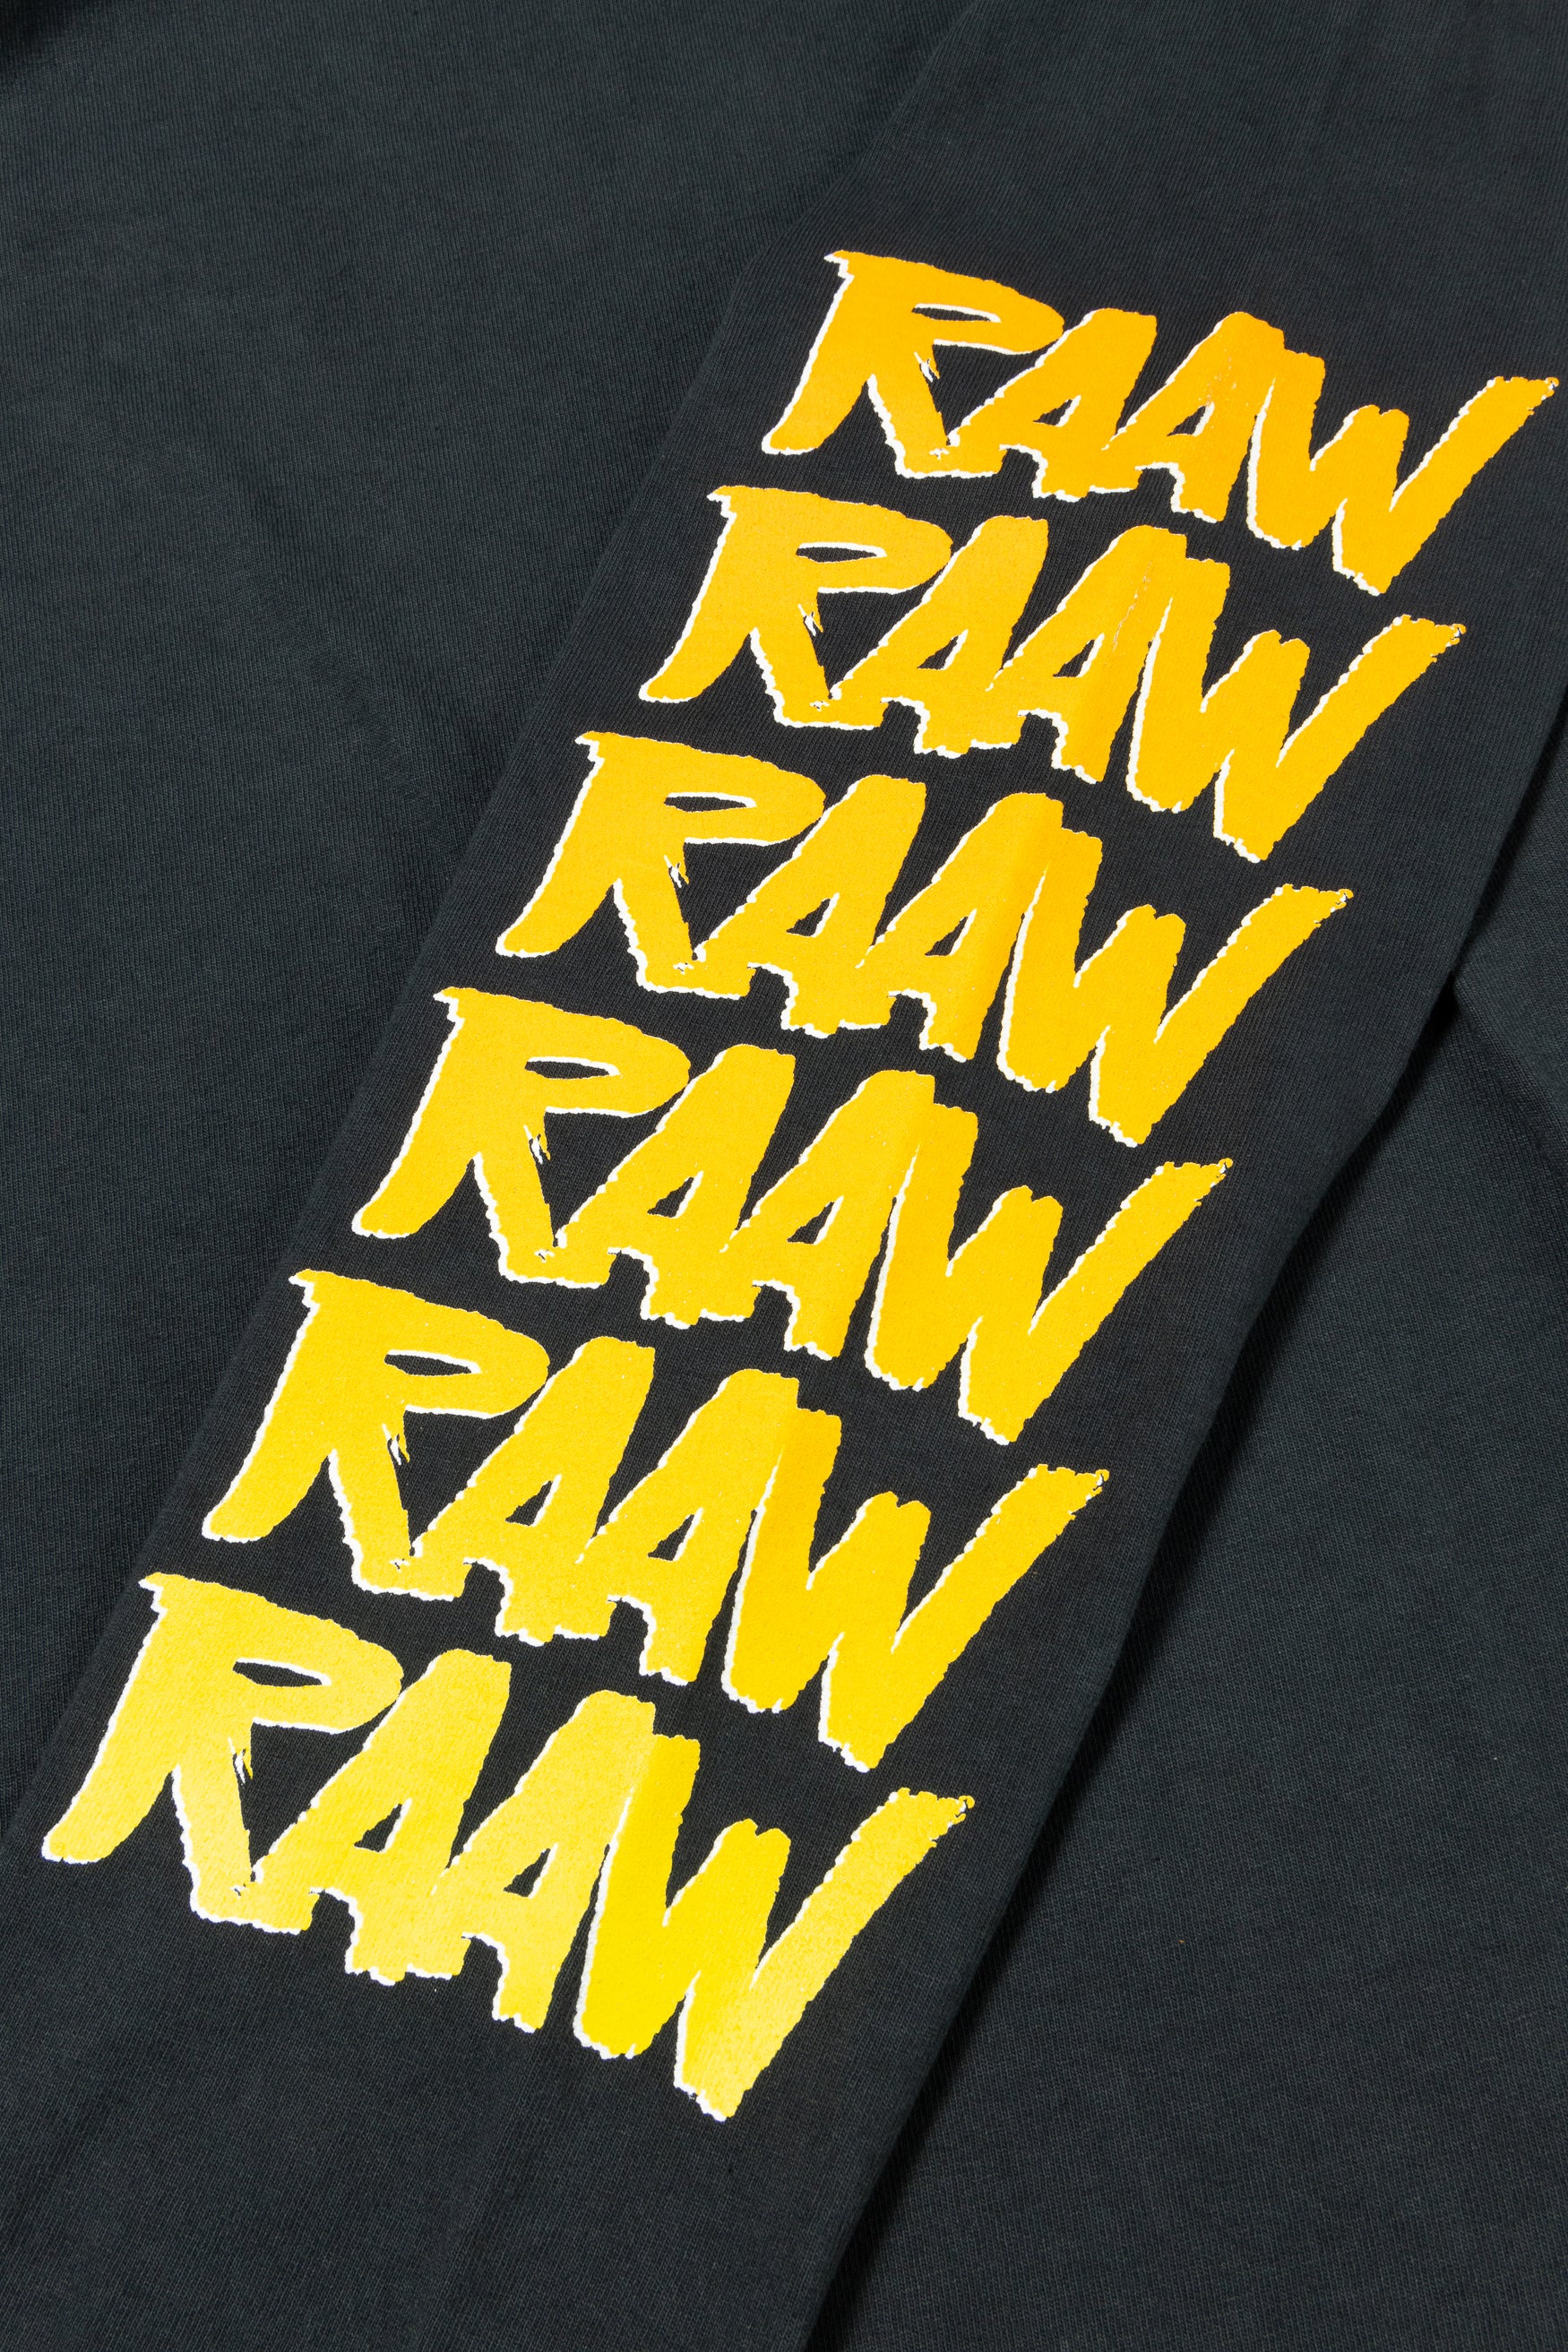 Load image into Gallery viewer, RAAW LS Tee